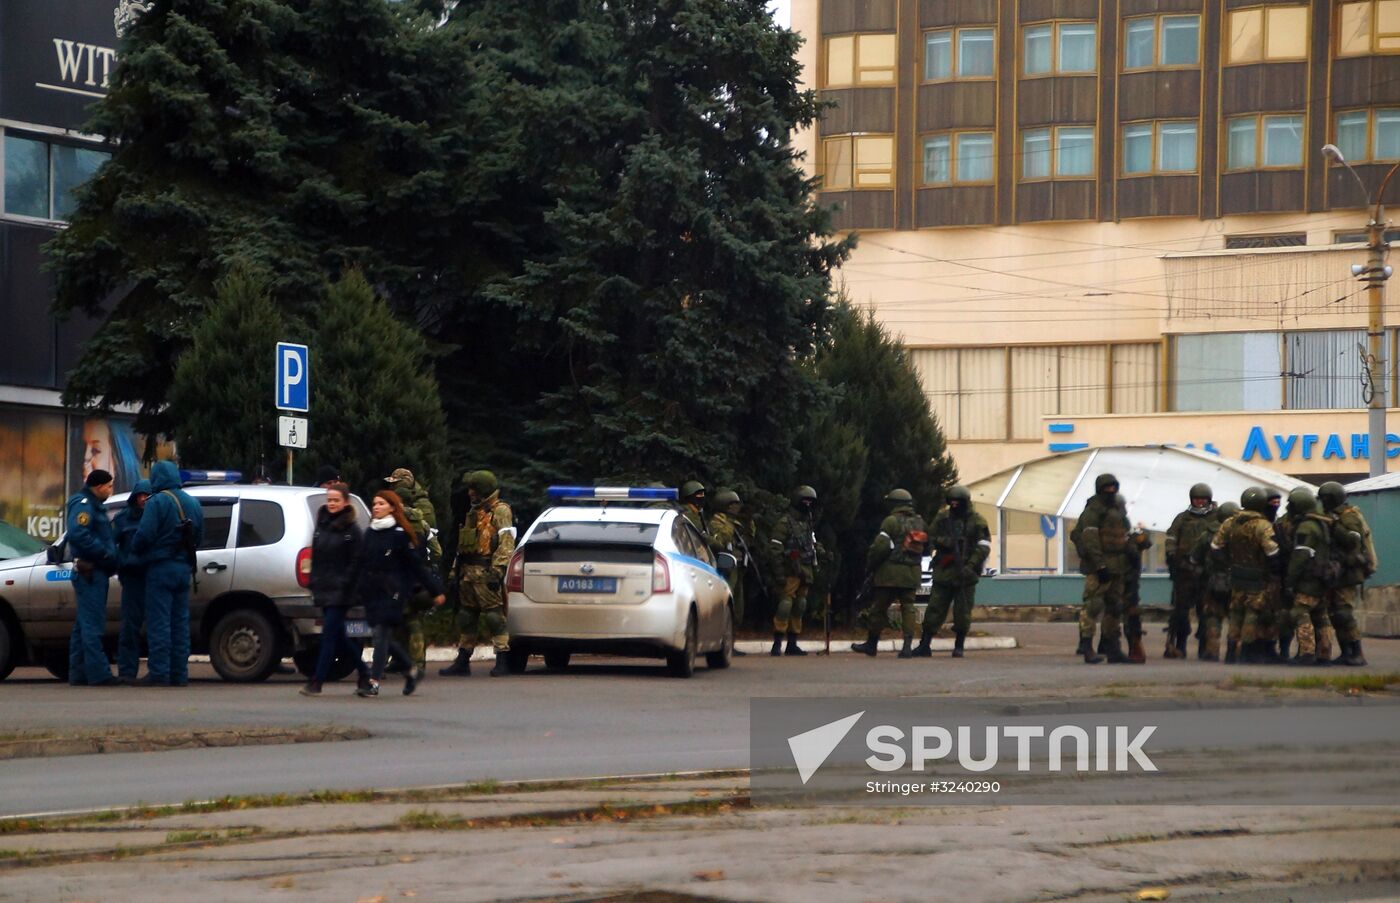 Central Lugansk cordoned off by armed people and armored vehicles